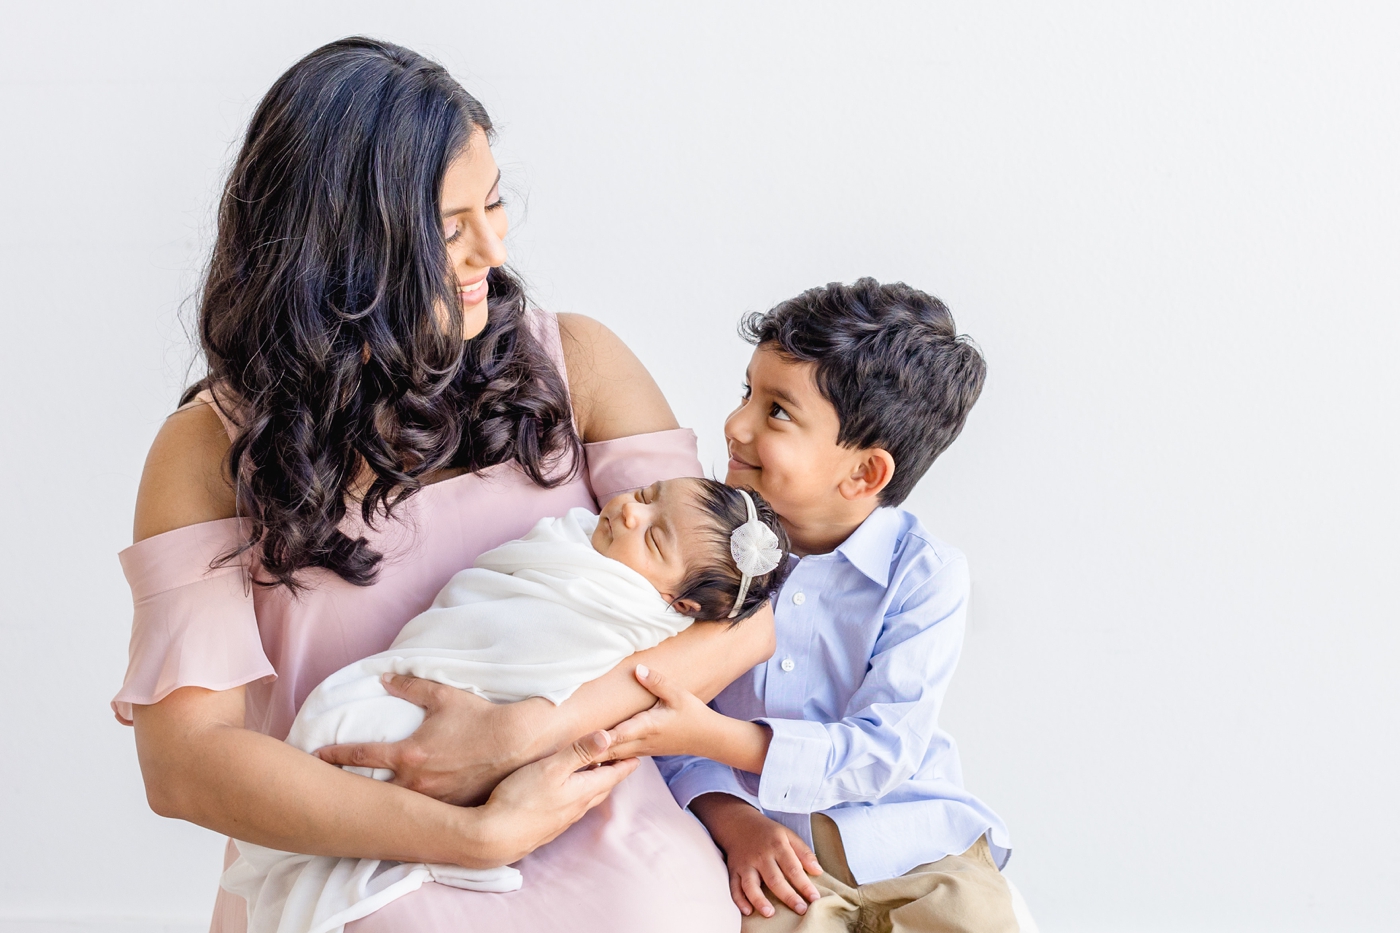 Mom smiling at oldest child during newborn session with video. Photo by Sana Ahmed Photography.